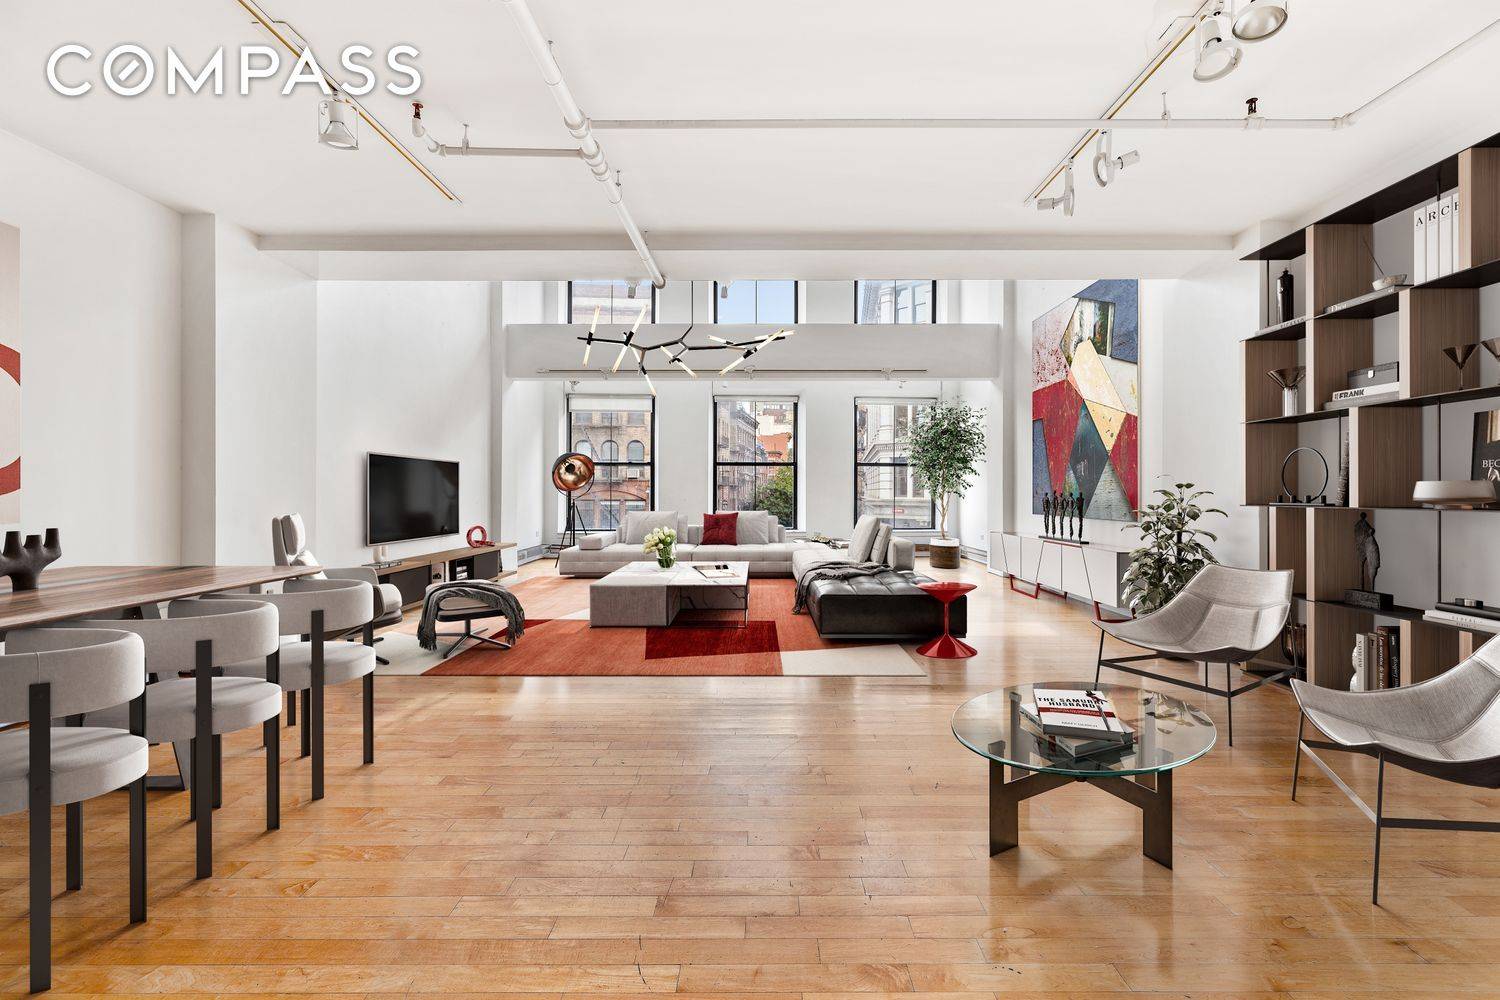 With a view looking directly down Spring Street, this 2, 177 SF full floor loft provides the perfect open floor living space, which could also be used as a gallery ...